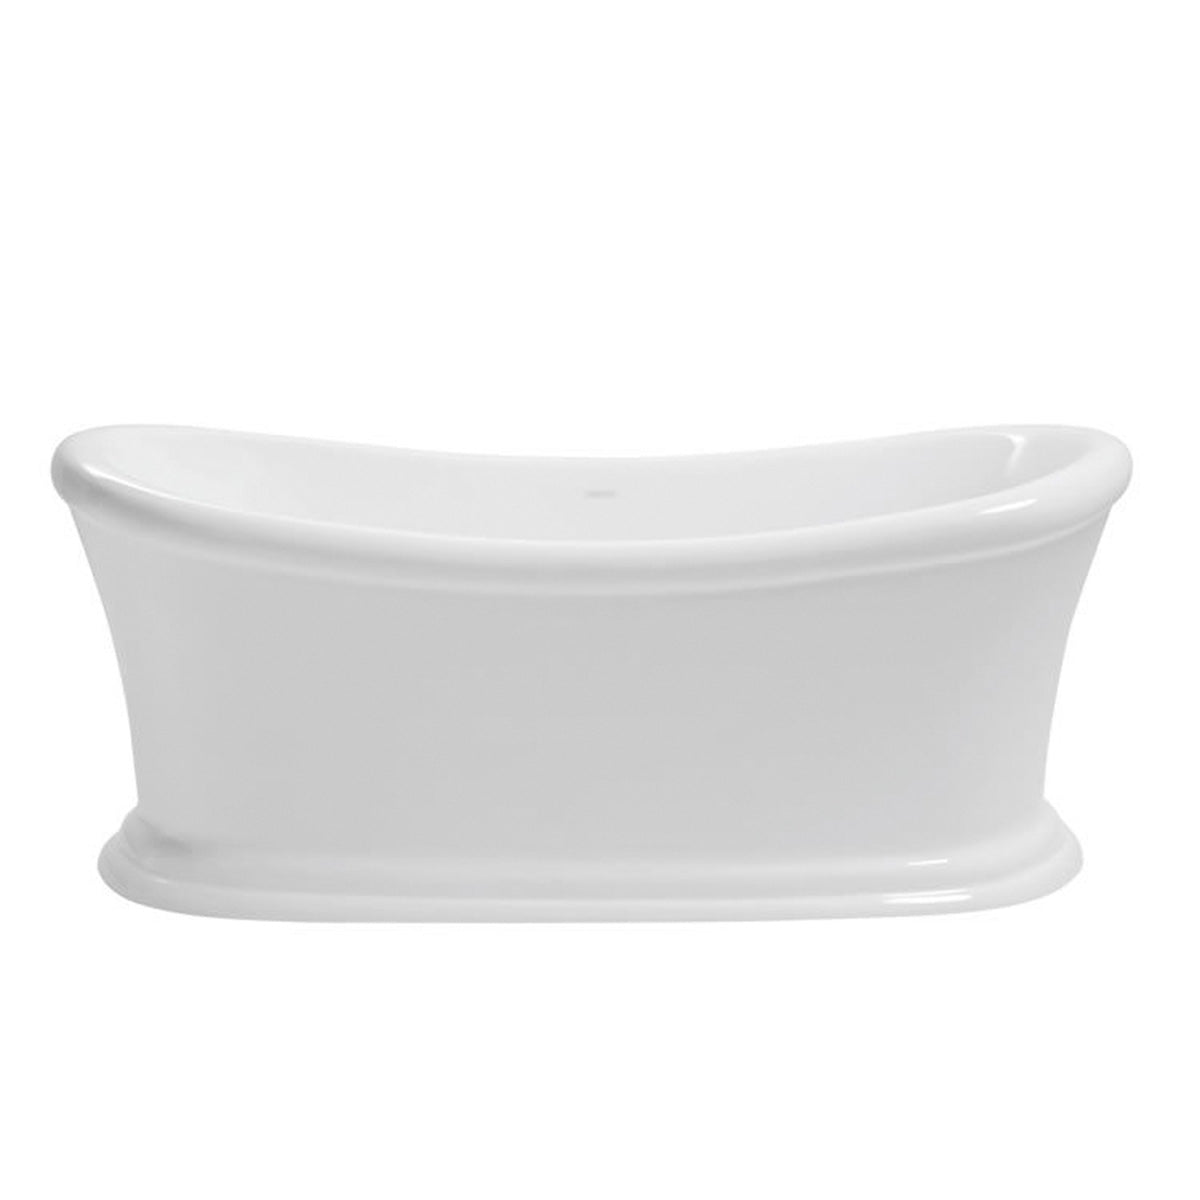 Heritage Orford Roll Top Freestanding Double Ended Acrylic Slipper Bath 1700x740mm White Gloss